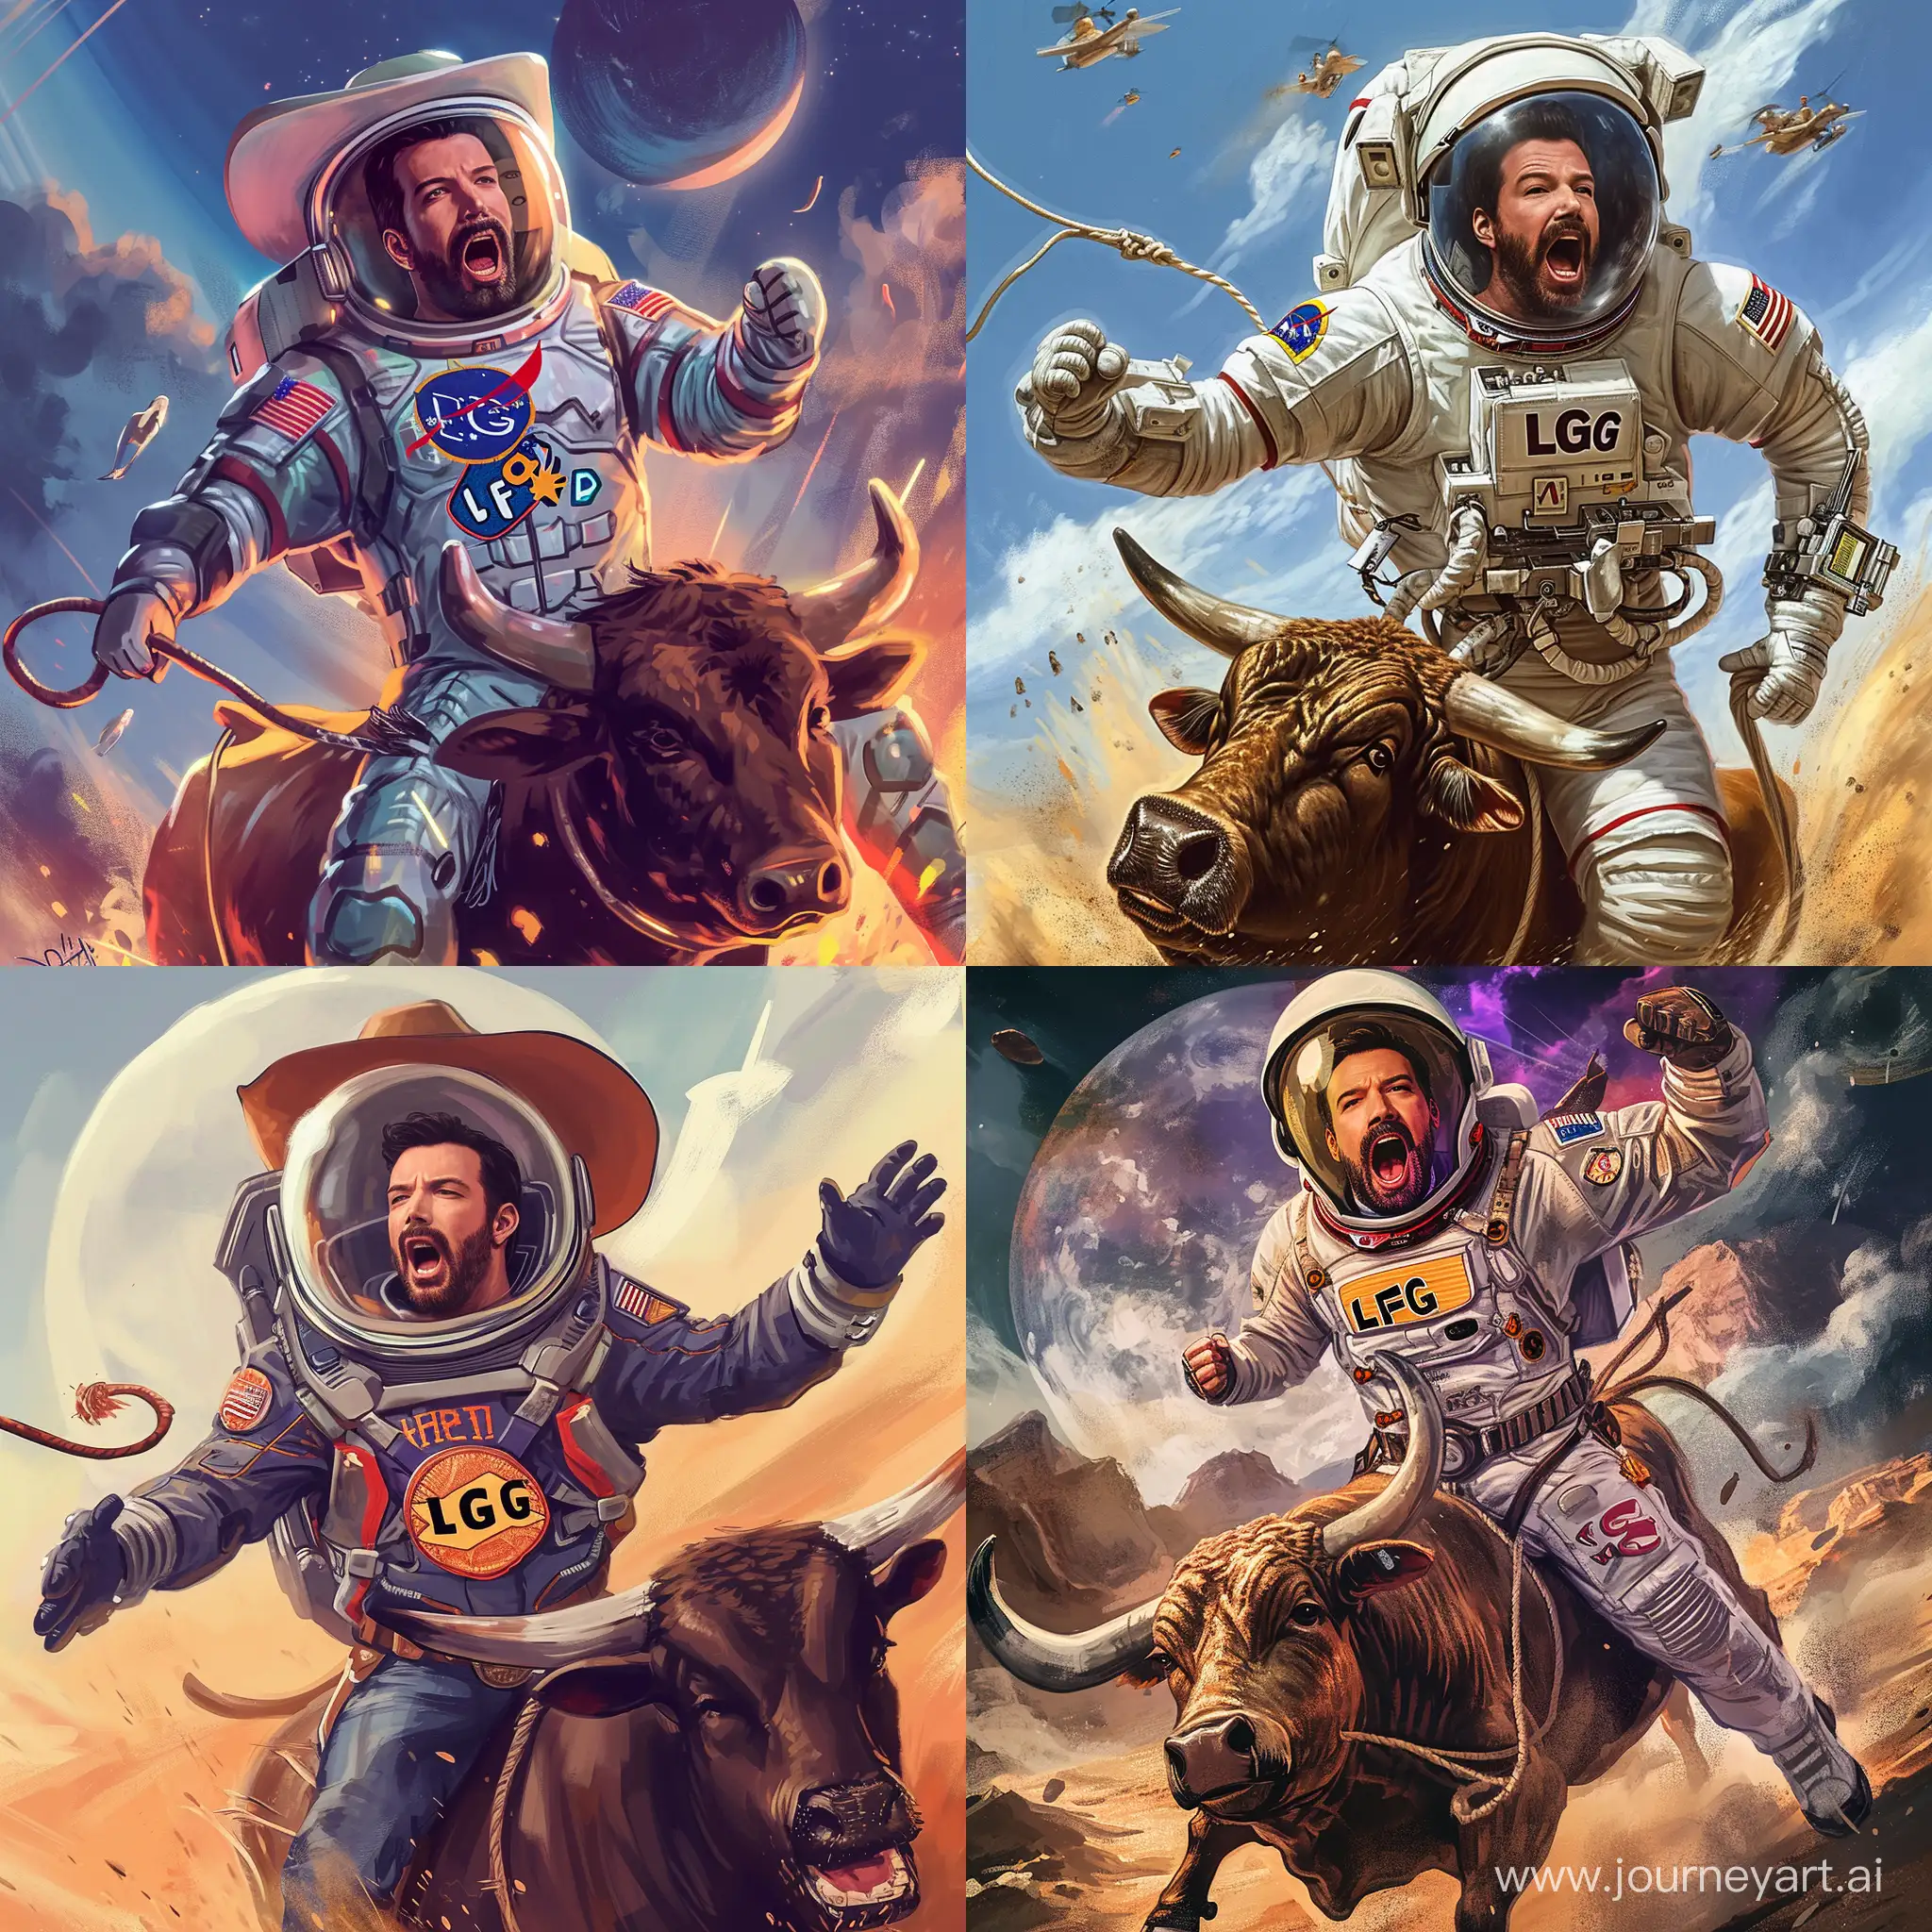 Ben Affleck dressed as space astronaut, riding a bull, with words "LFG" written on his space suit as a badge, in the style of a 90s nickelodeon cartoon, cowboy hat, and screaming " meme TF out of me"